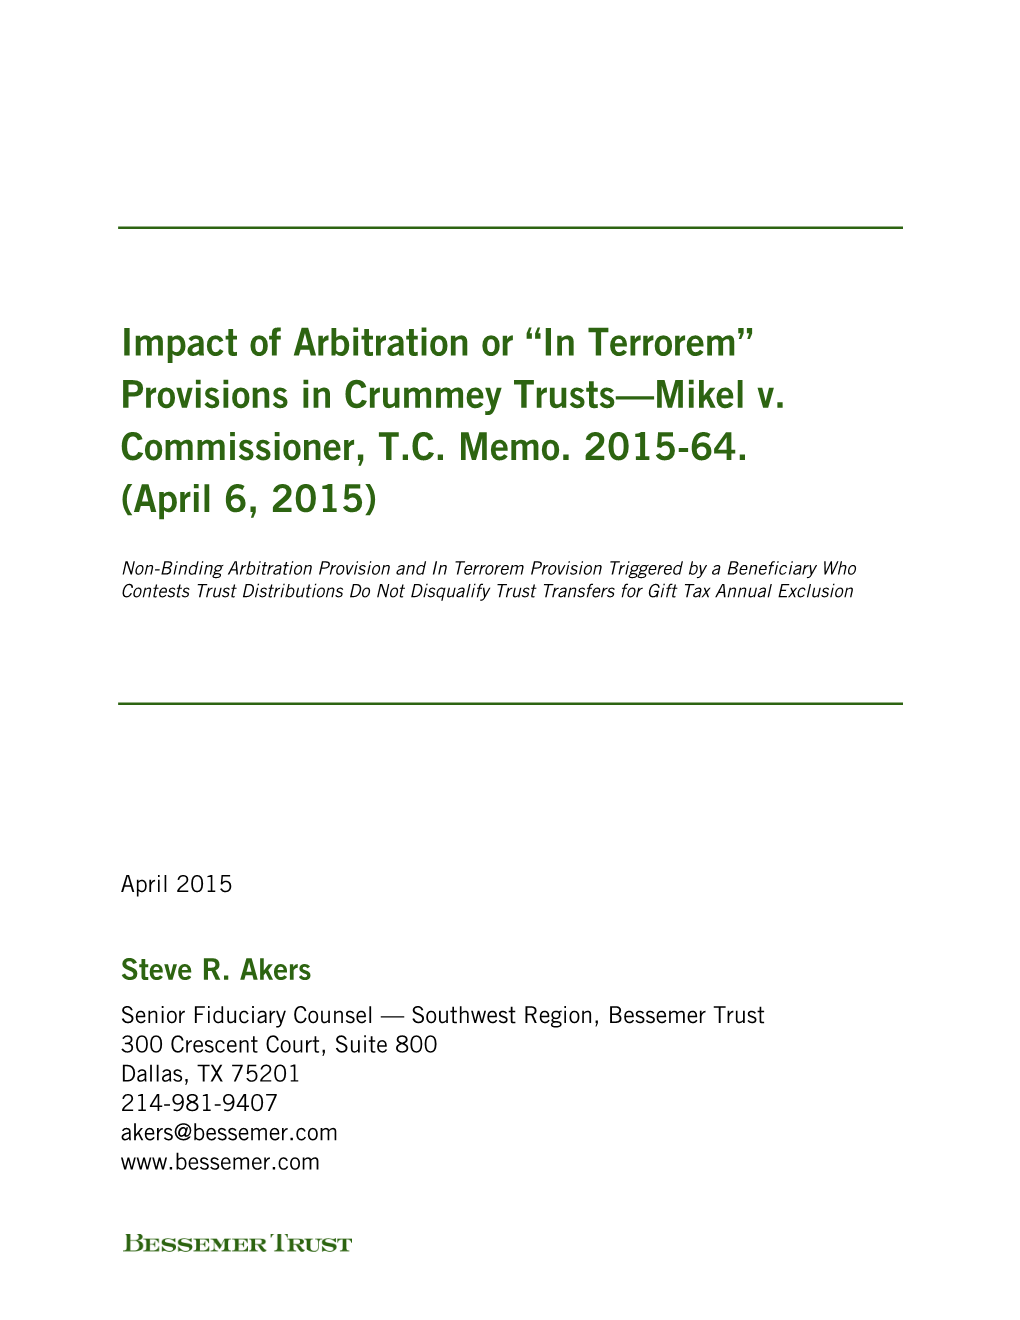 Impact of Arbitration Or “In Terrorem” Provisions in Crummey Trusts—Mikel V